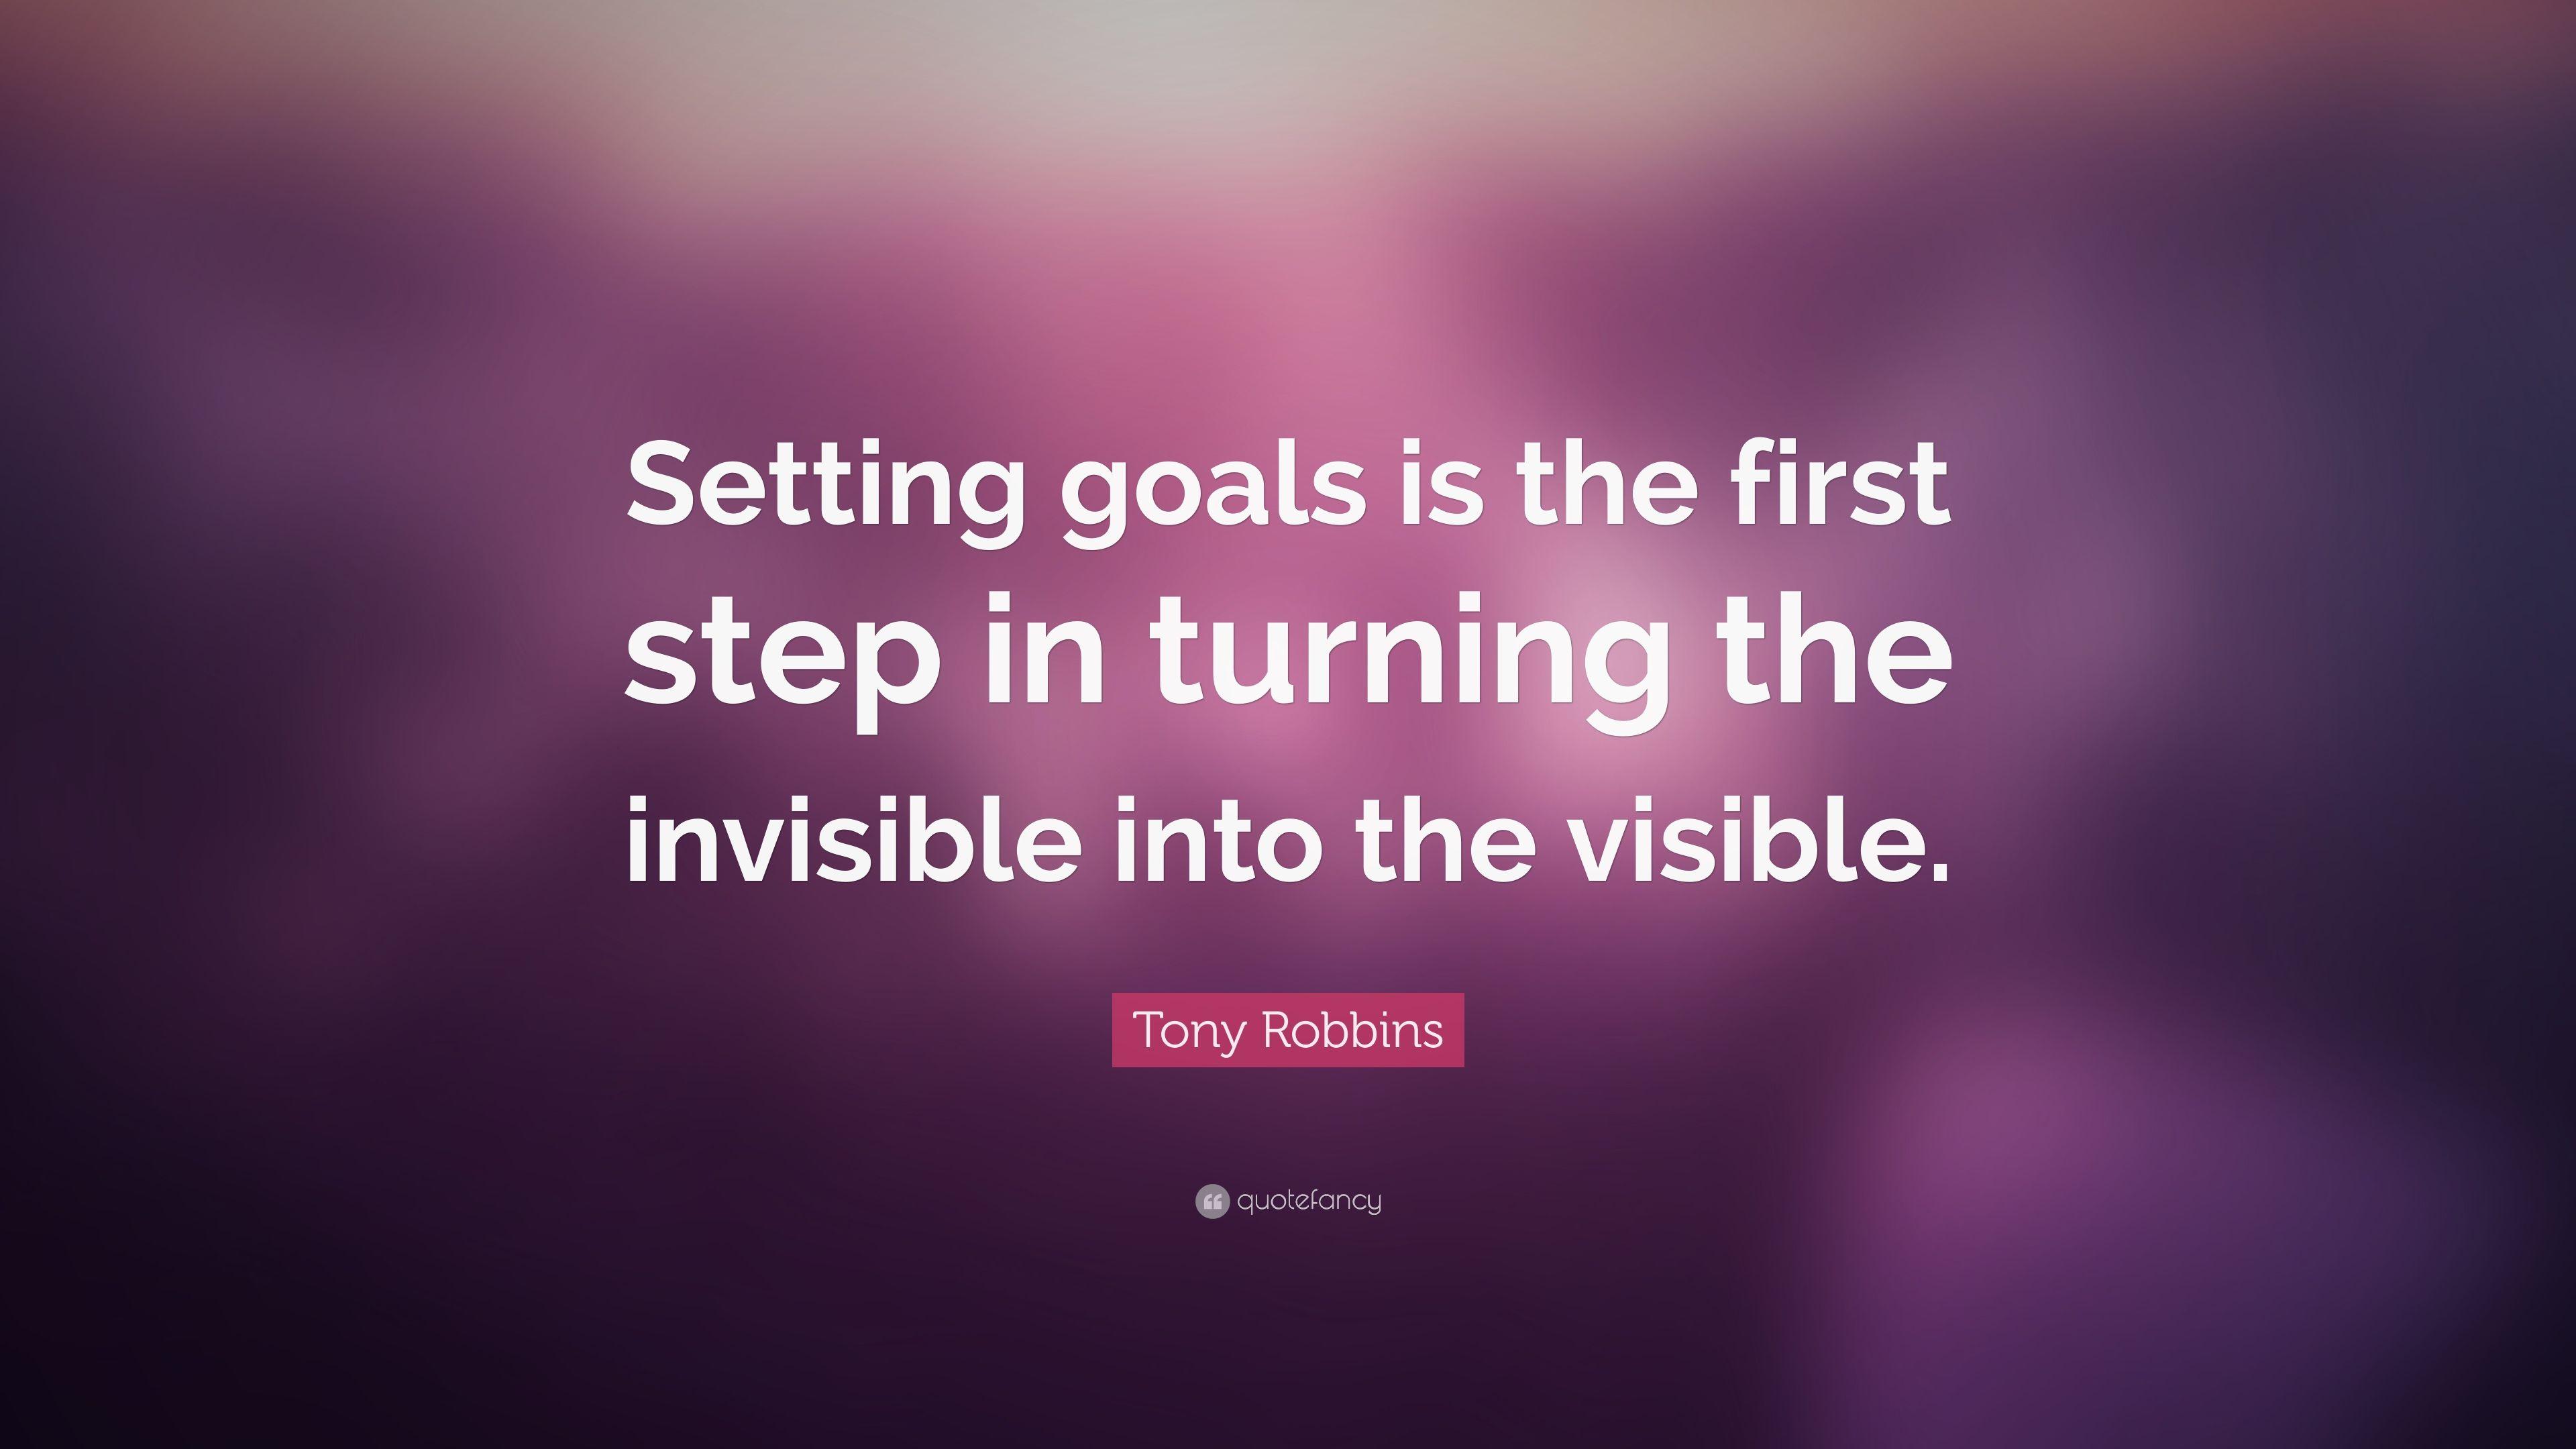 Tony Robbins Quote: “Setting goals is the first step in turning